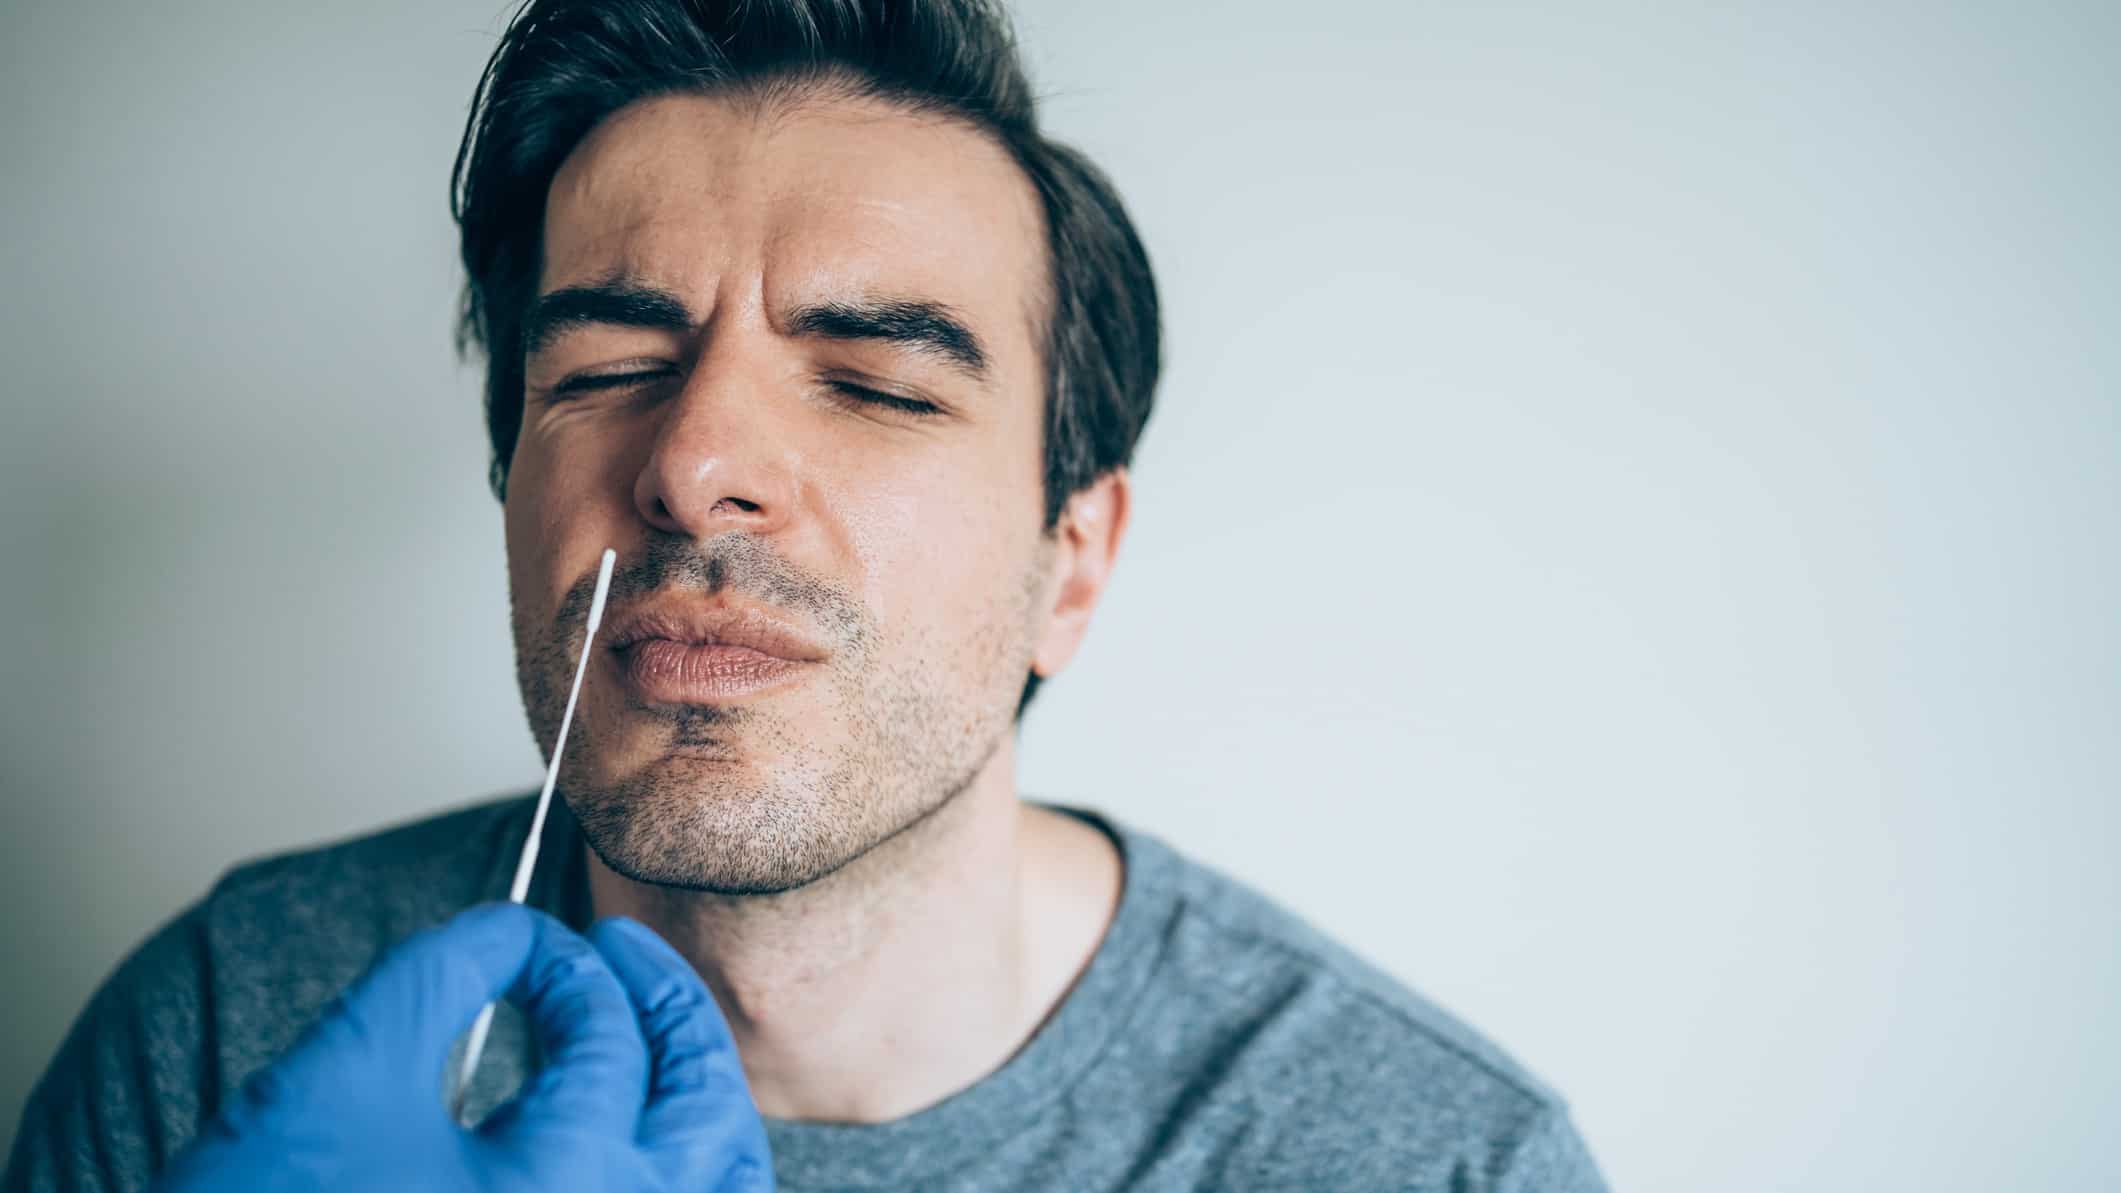 A man screws up his face as his nose is swabbed for a COVID test.